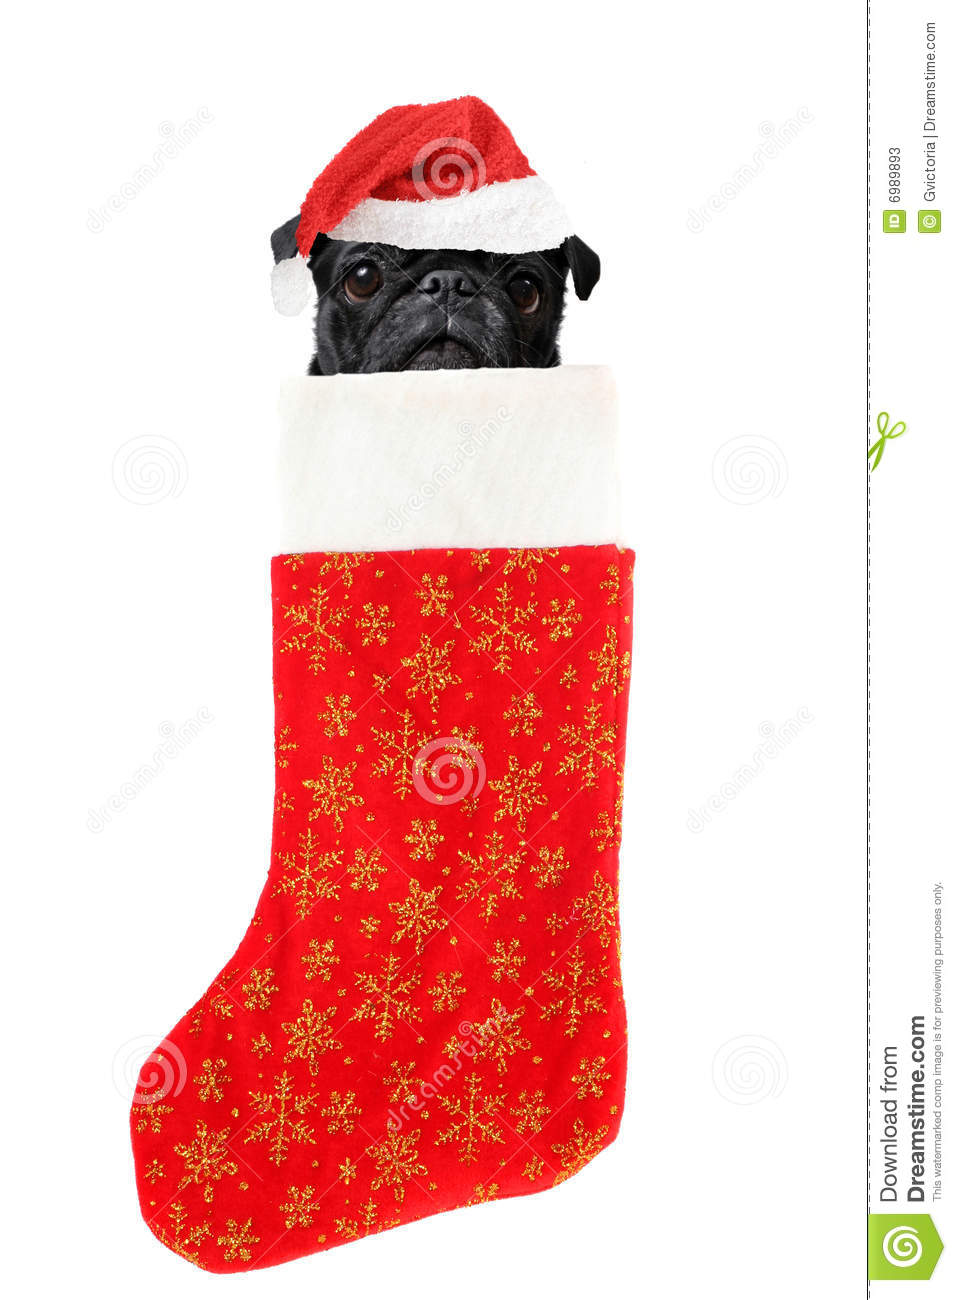 Pug With Santa Claus Hat Inside Festive Christmas Stocking With Gold